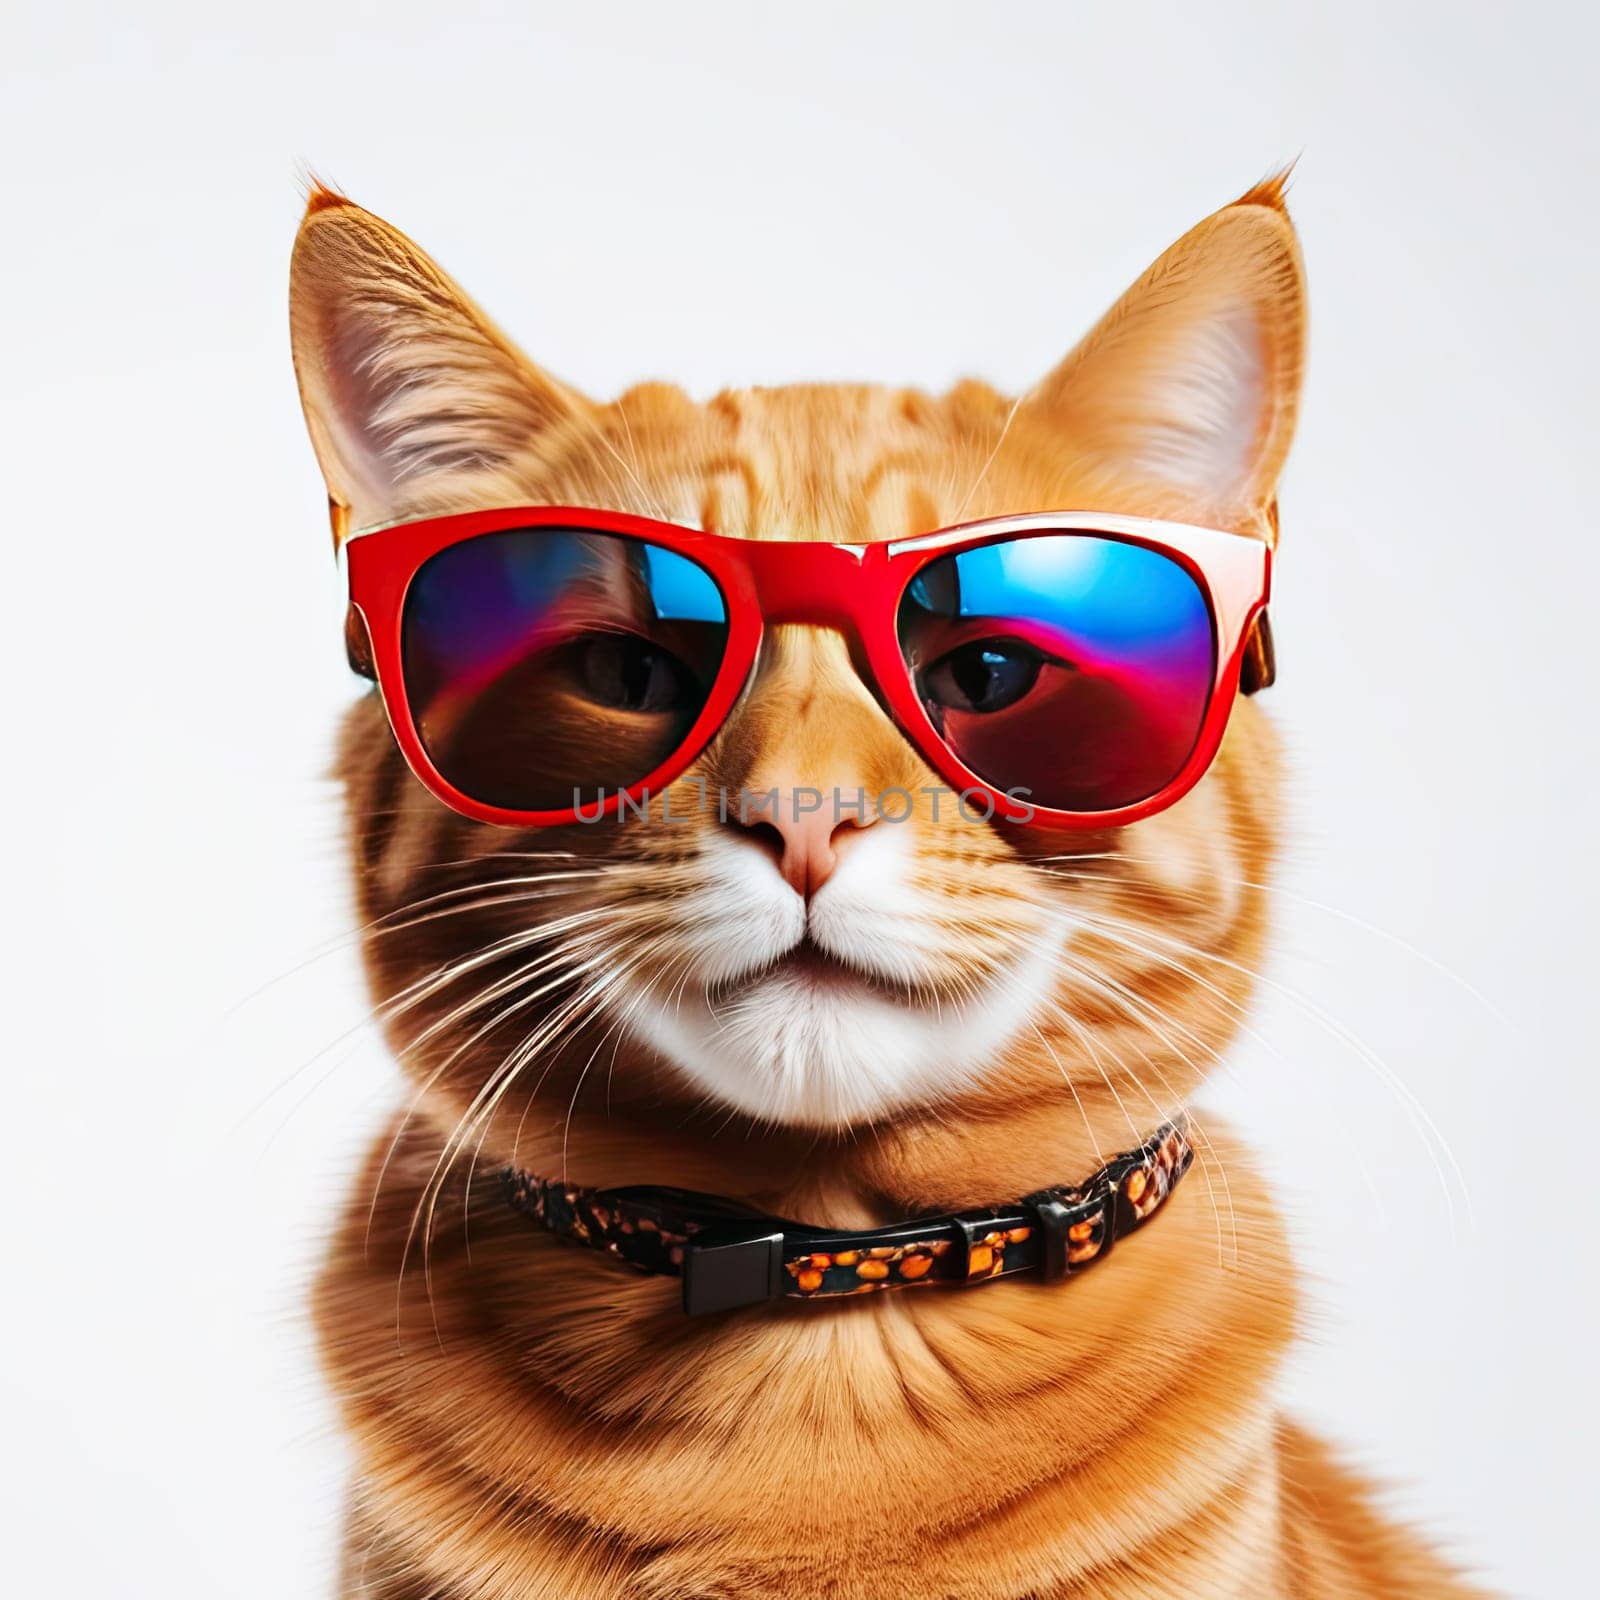  funny red cat wearing sunglasses  by Ladouski